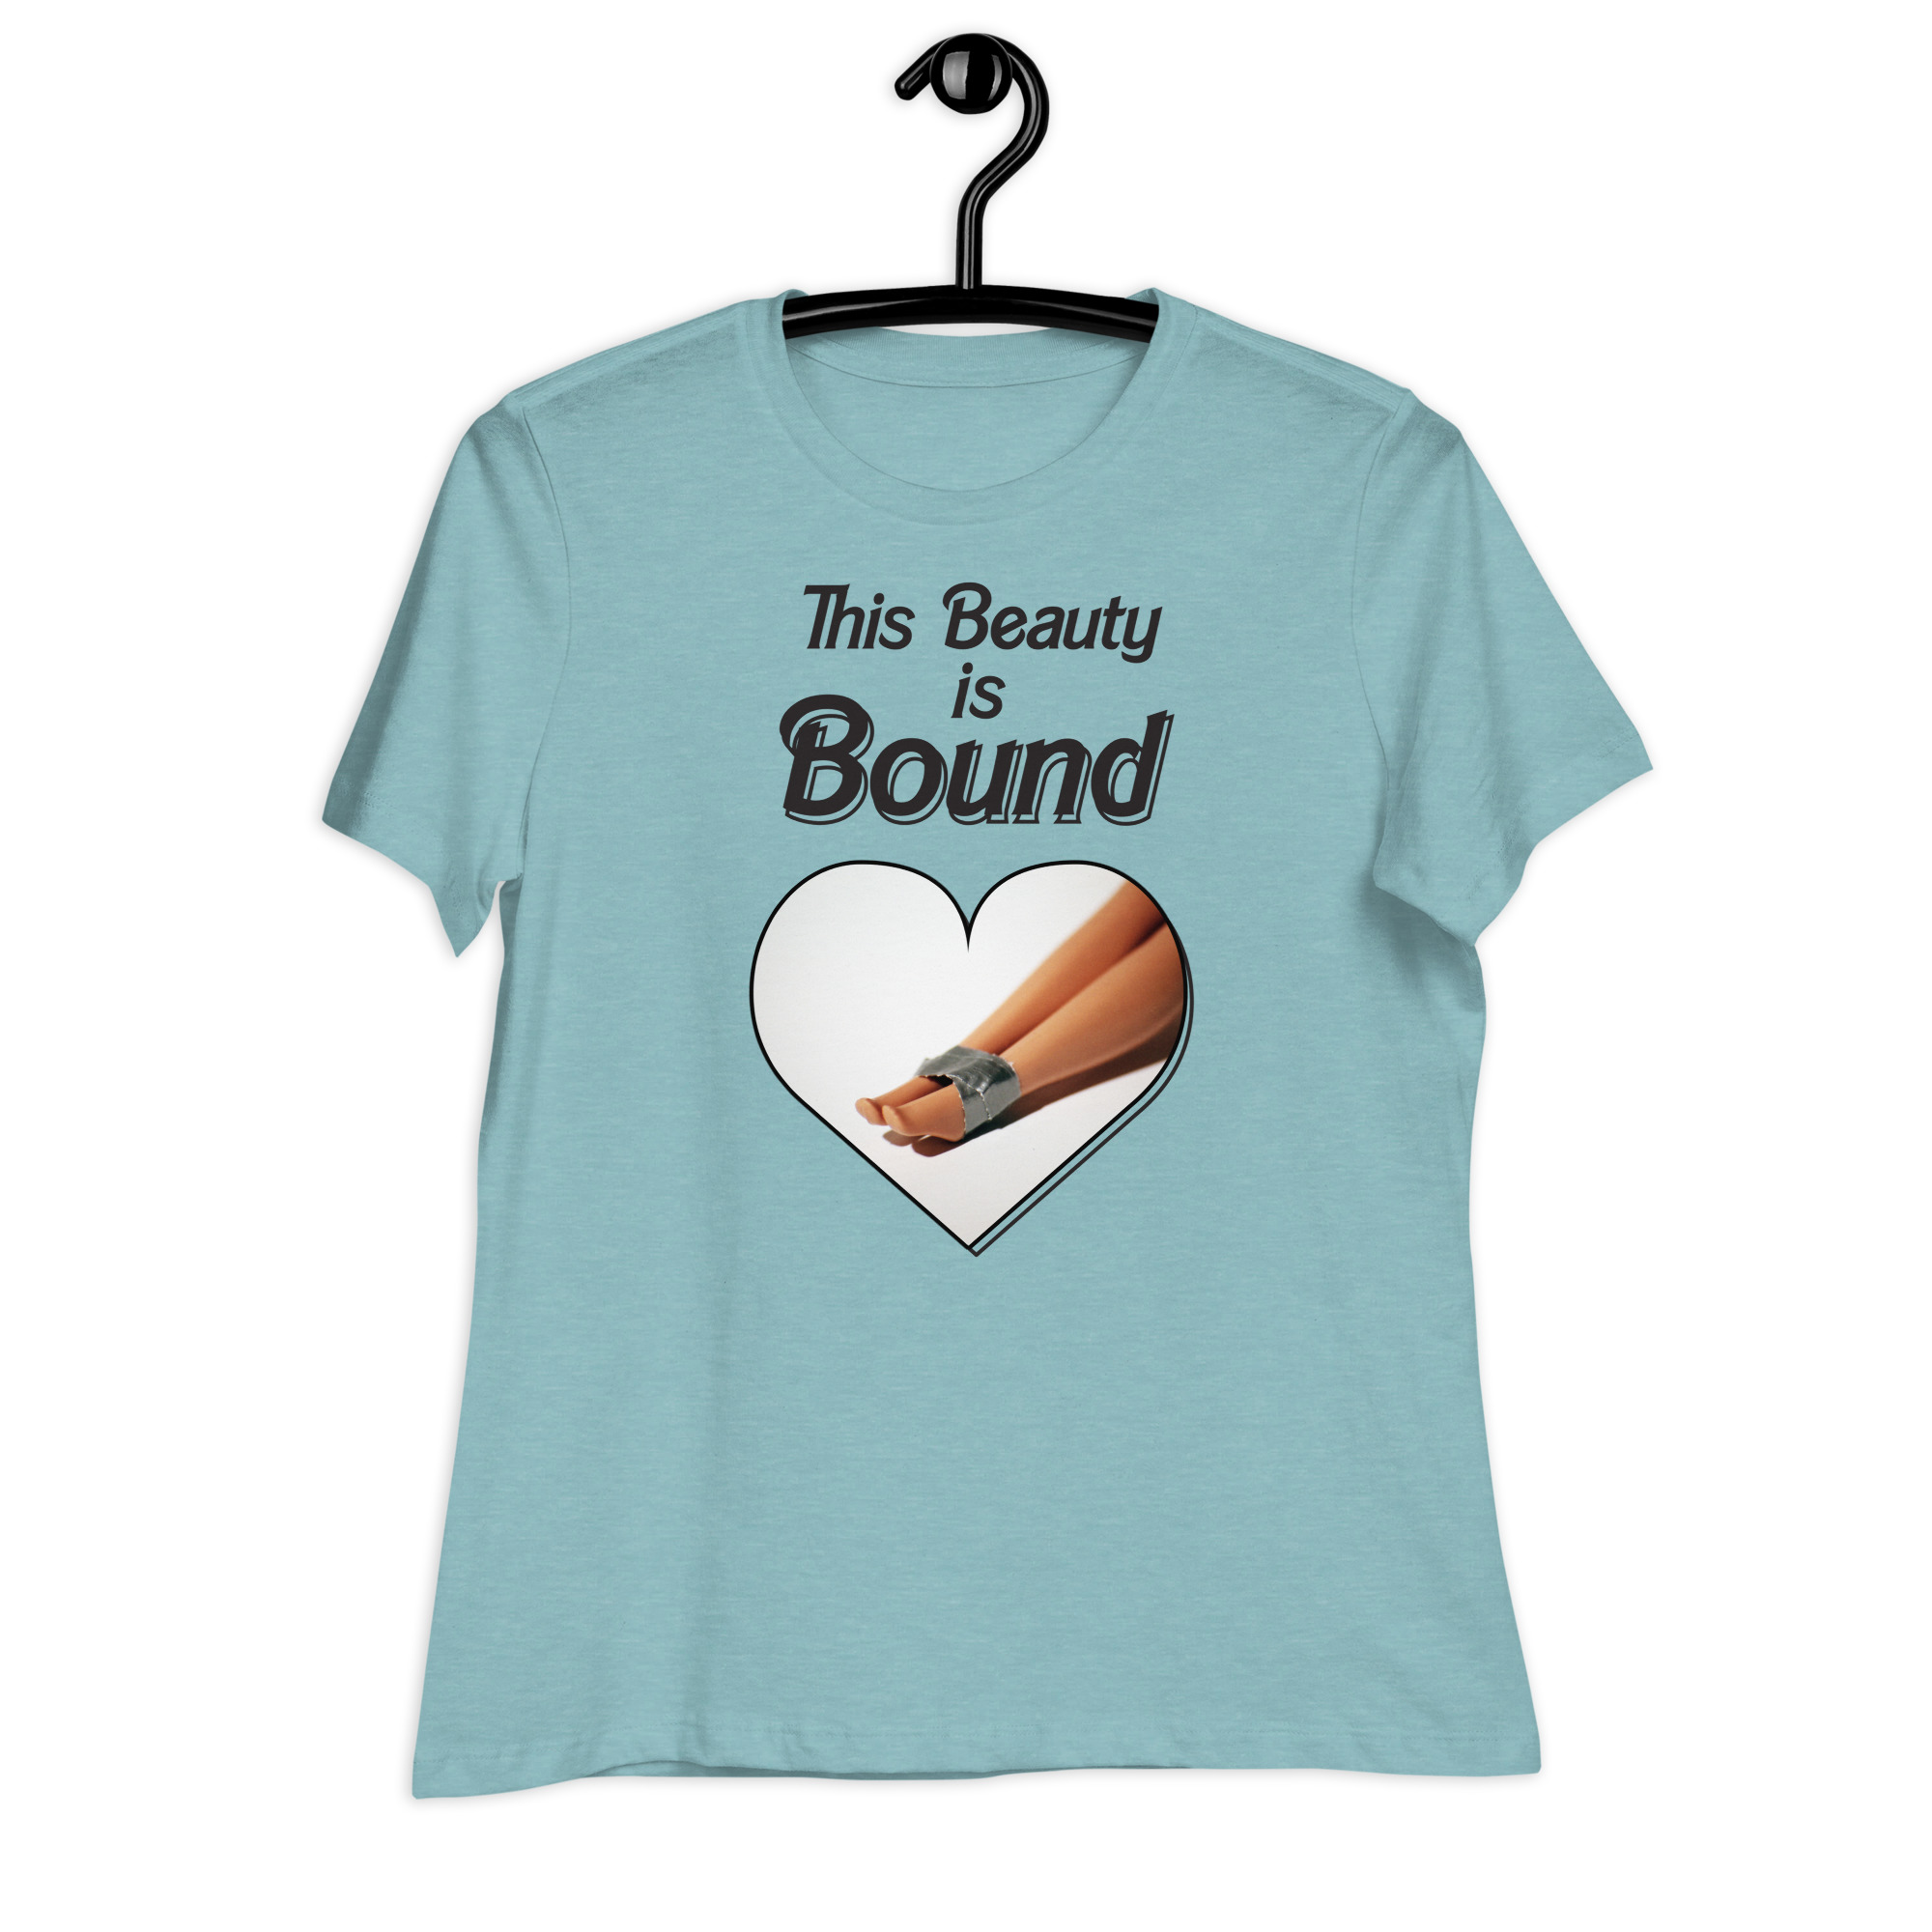 This Beauty is Bound Tshirt by Wilde Designs